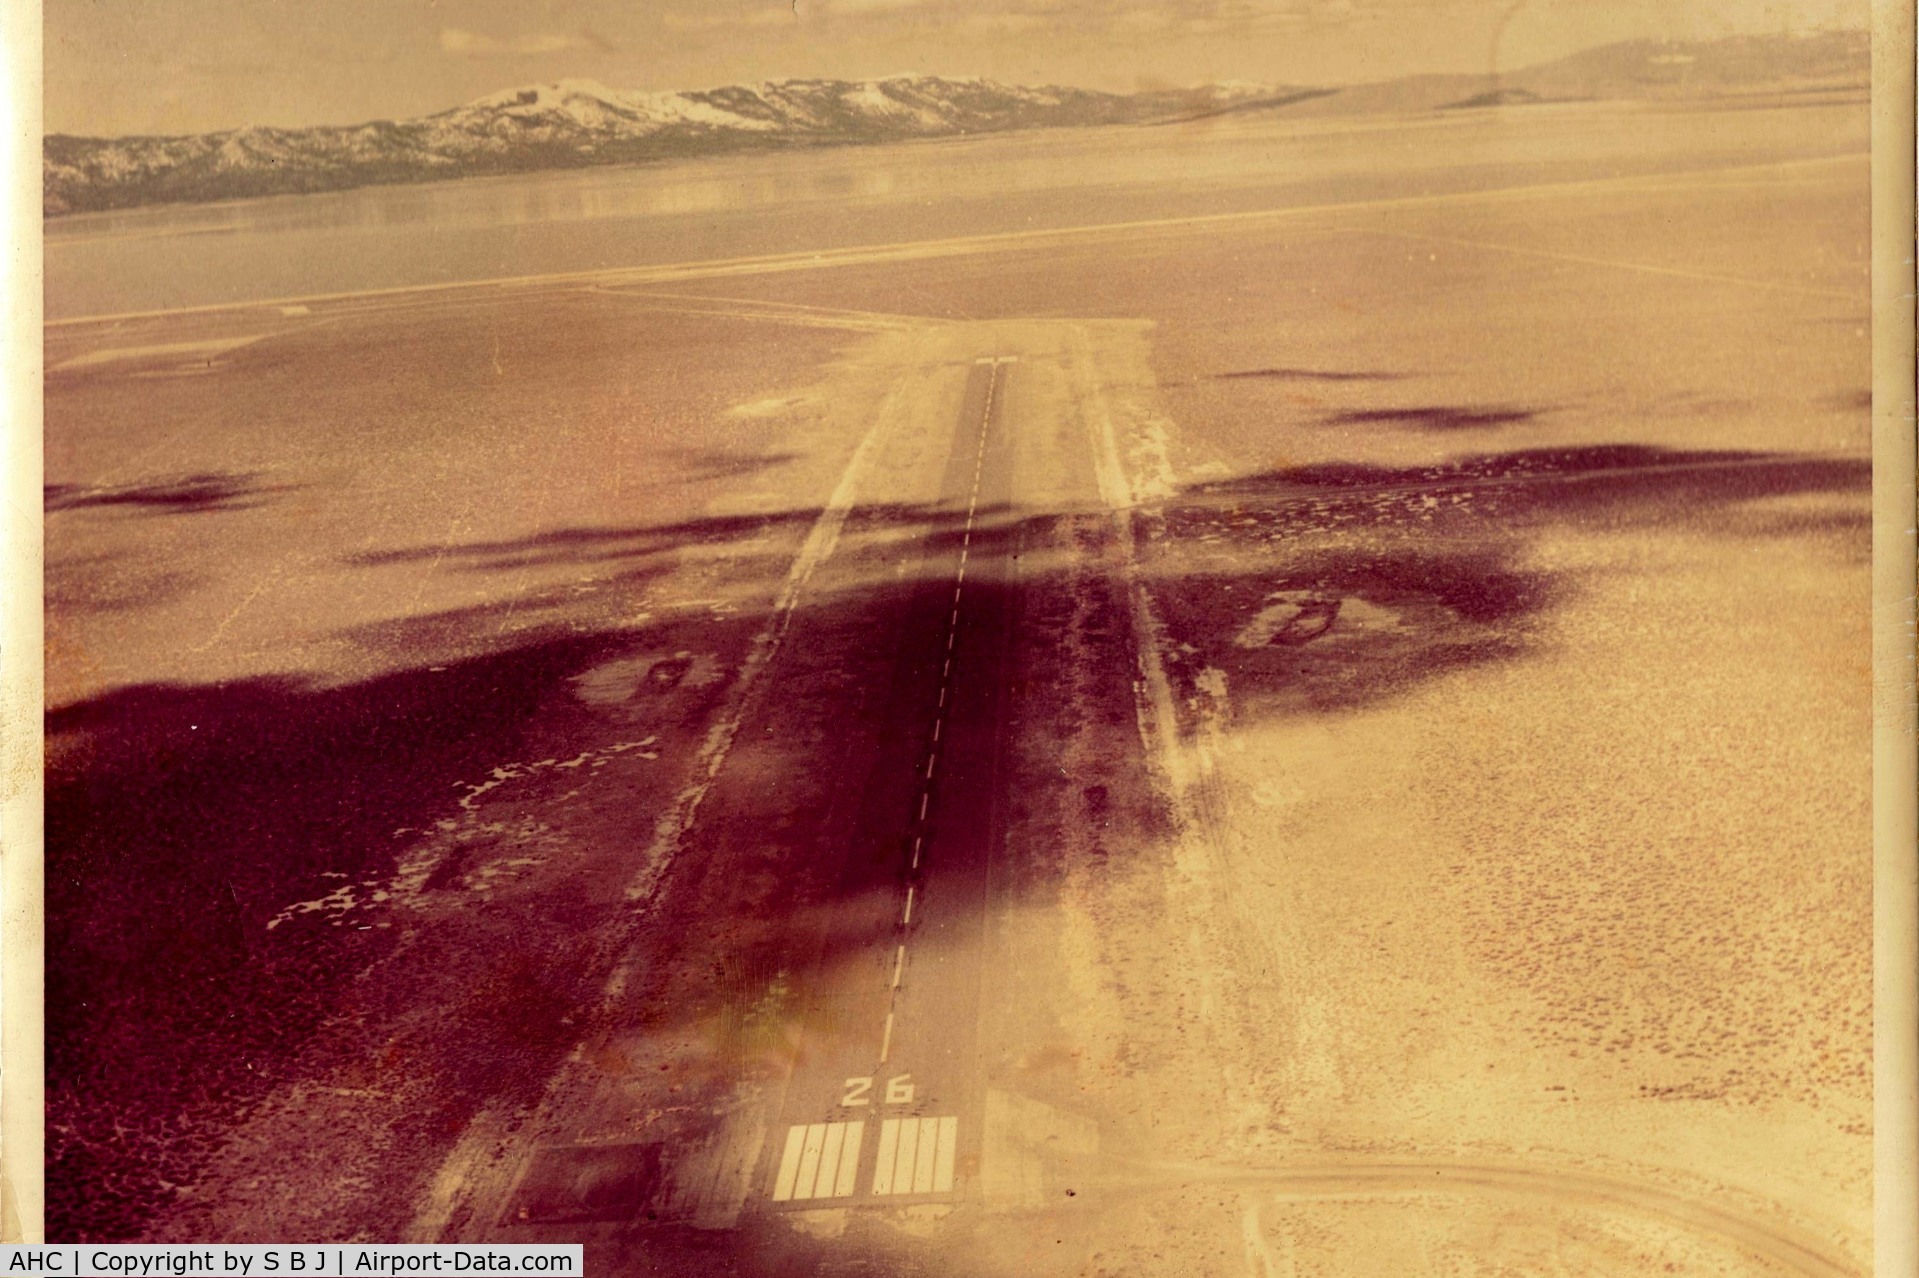 Amedee Aaf Airport (AHC) - Amedee AAF near Herlong,Ca with Honey Lake seen in the distance which is often a dry lake.Strip was built in 1942 and is still an active in 2015.Picture is from around 1965.